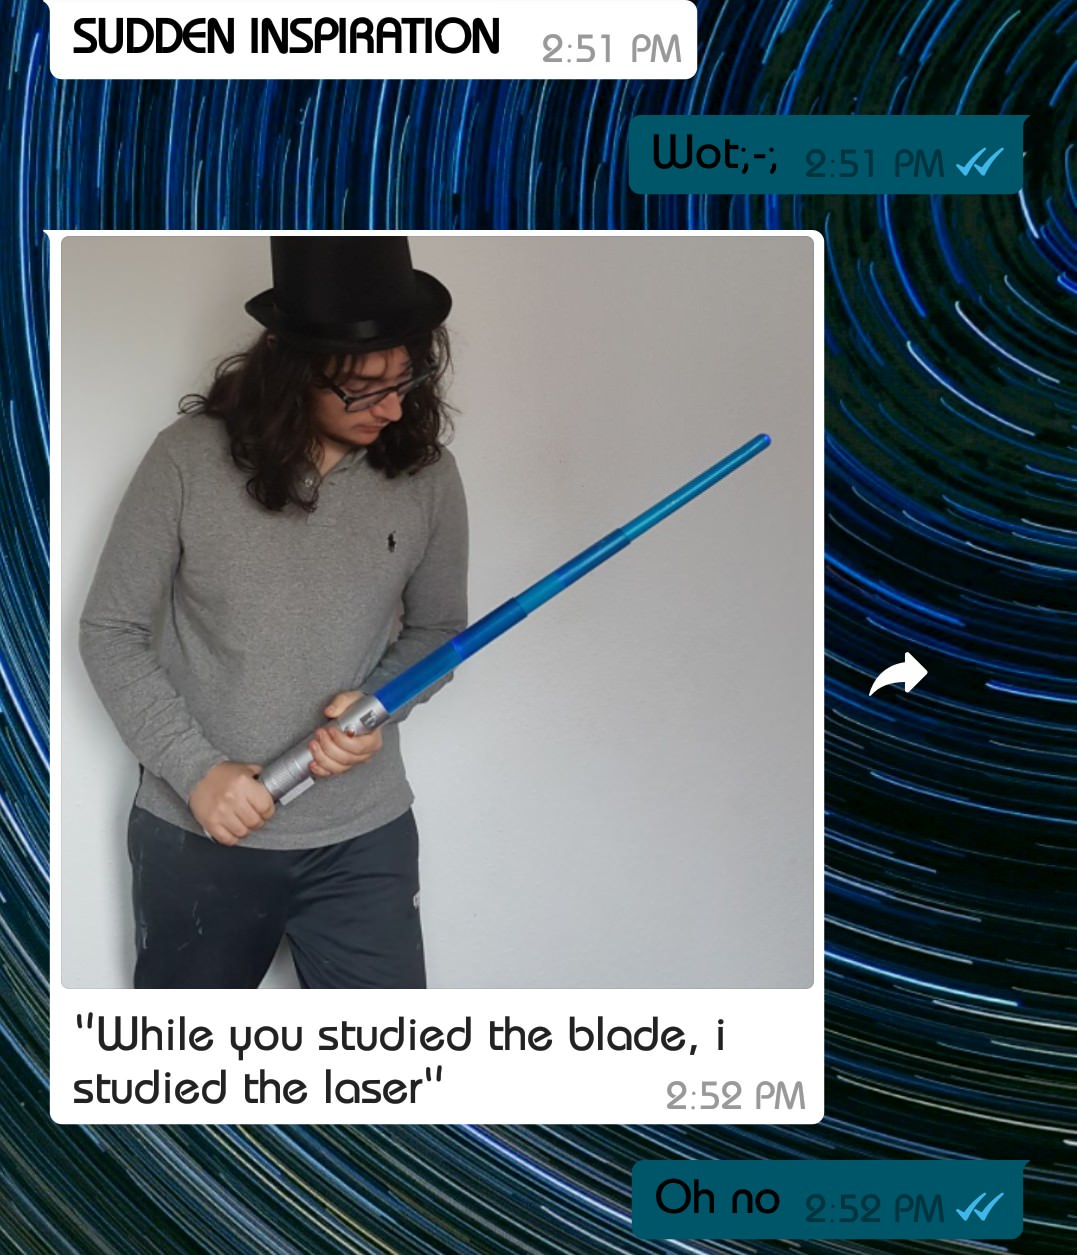 angle - Sudden Inspiration 'Wot;; W To "While you studied the blade, i studied the laser" Oh no 2.52 Pm W